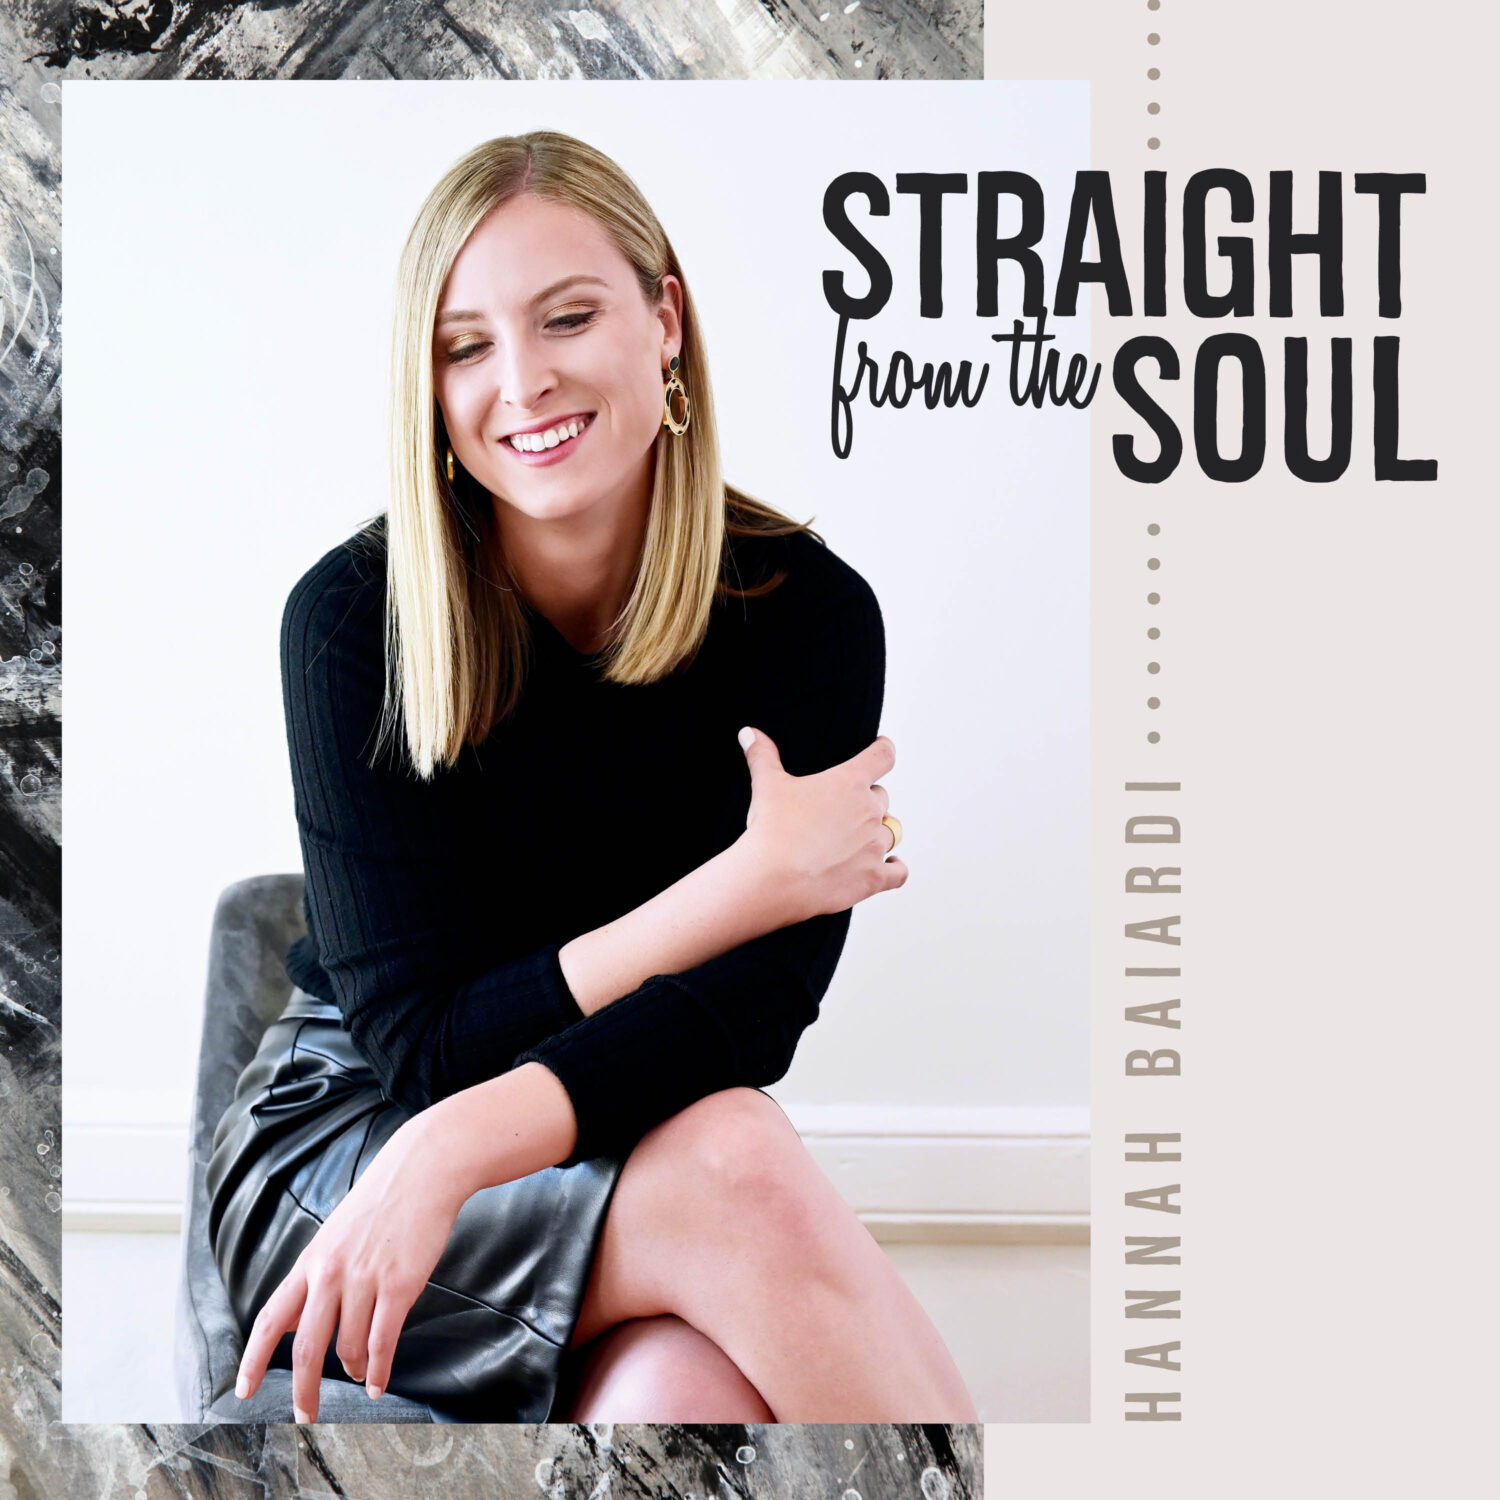 Cover art for Hannah Baiardi's album, "Straight from the Soul"; Photo of woman in black clothing, positioned to the left of black text that reads "Straight from the Soul"